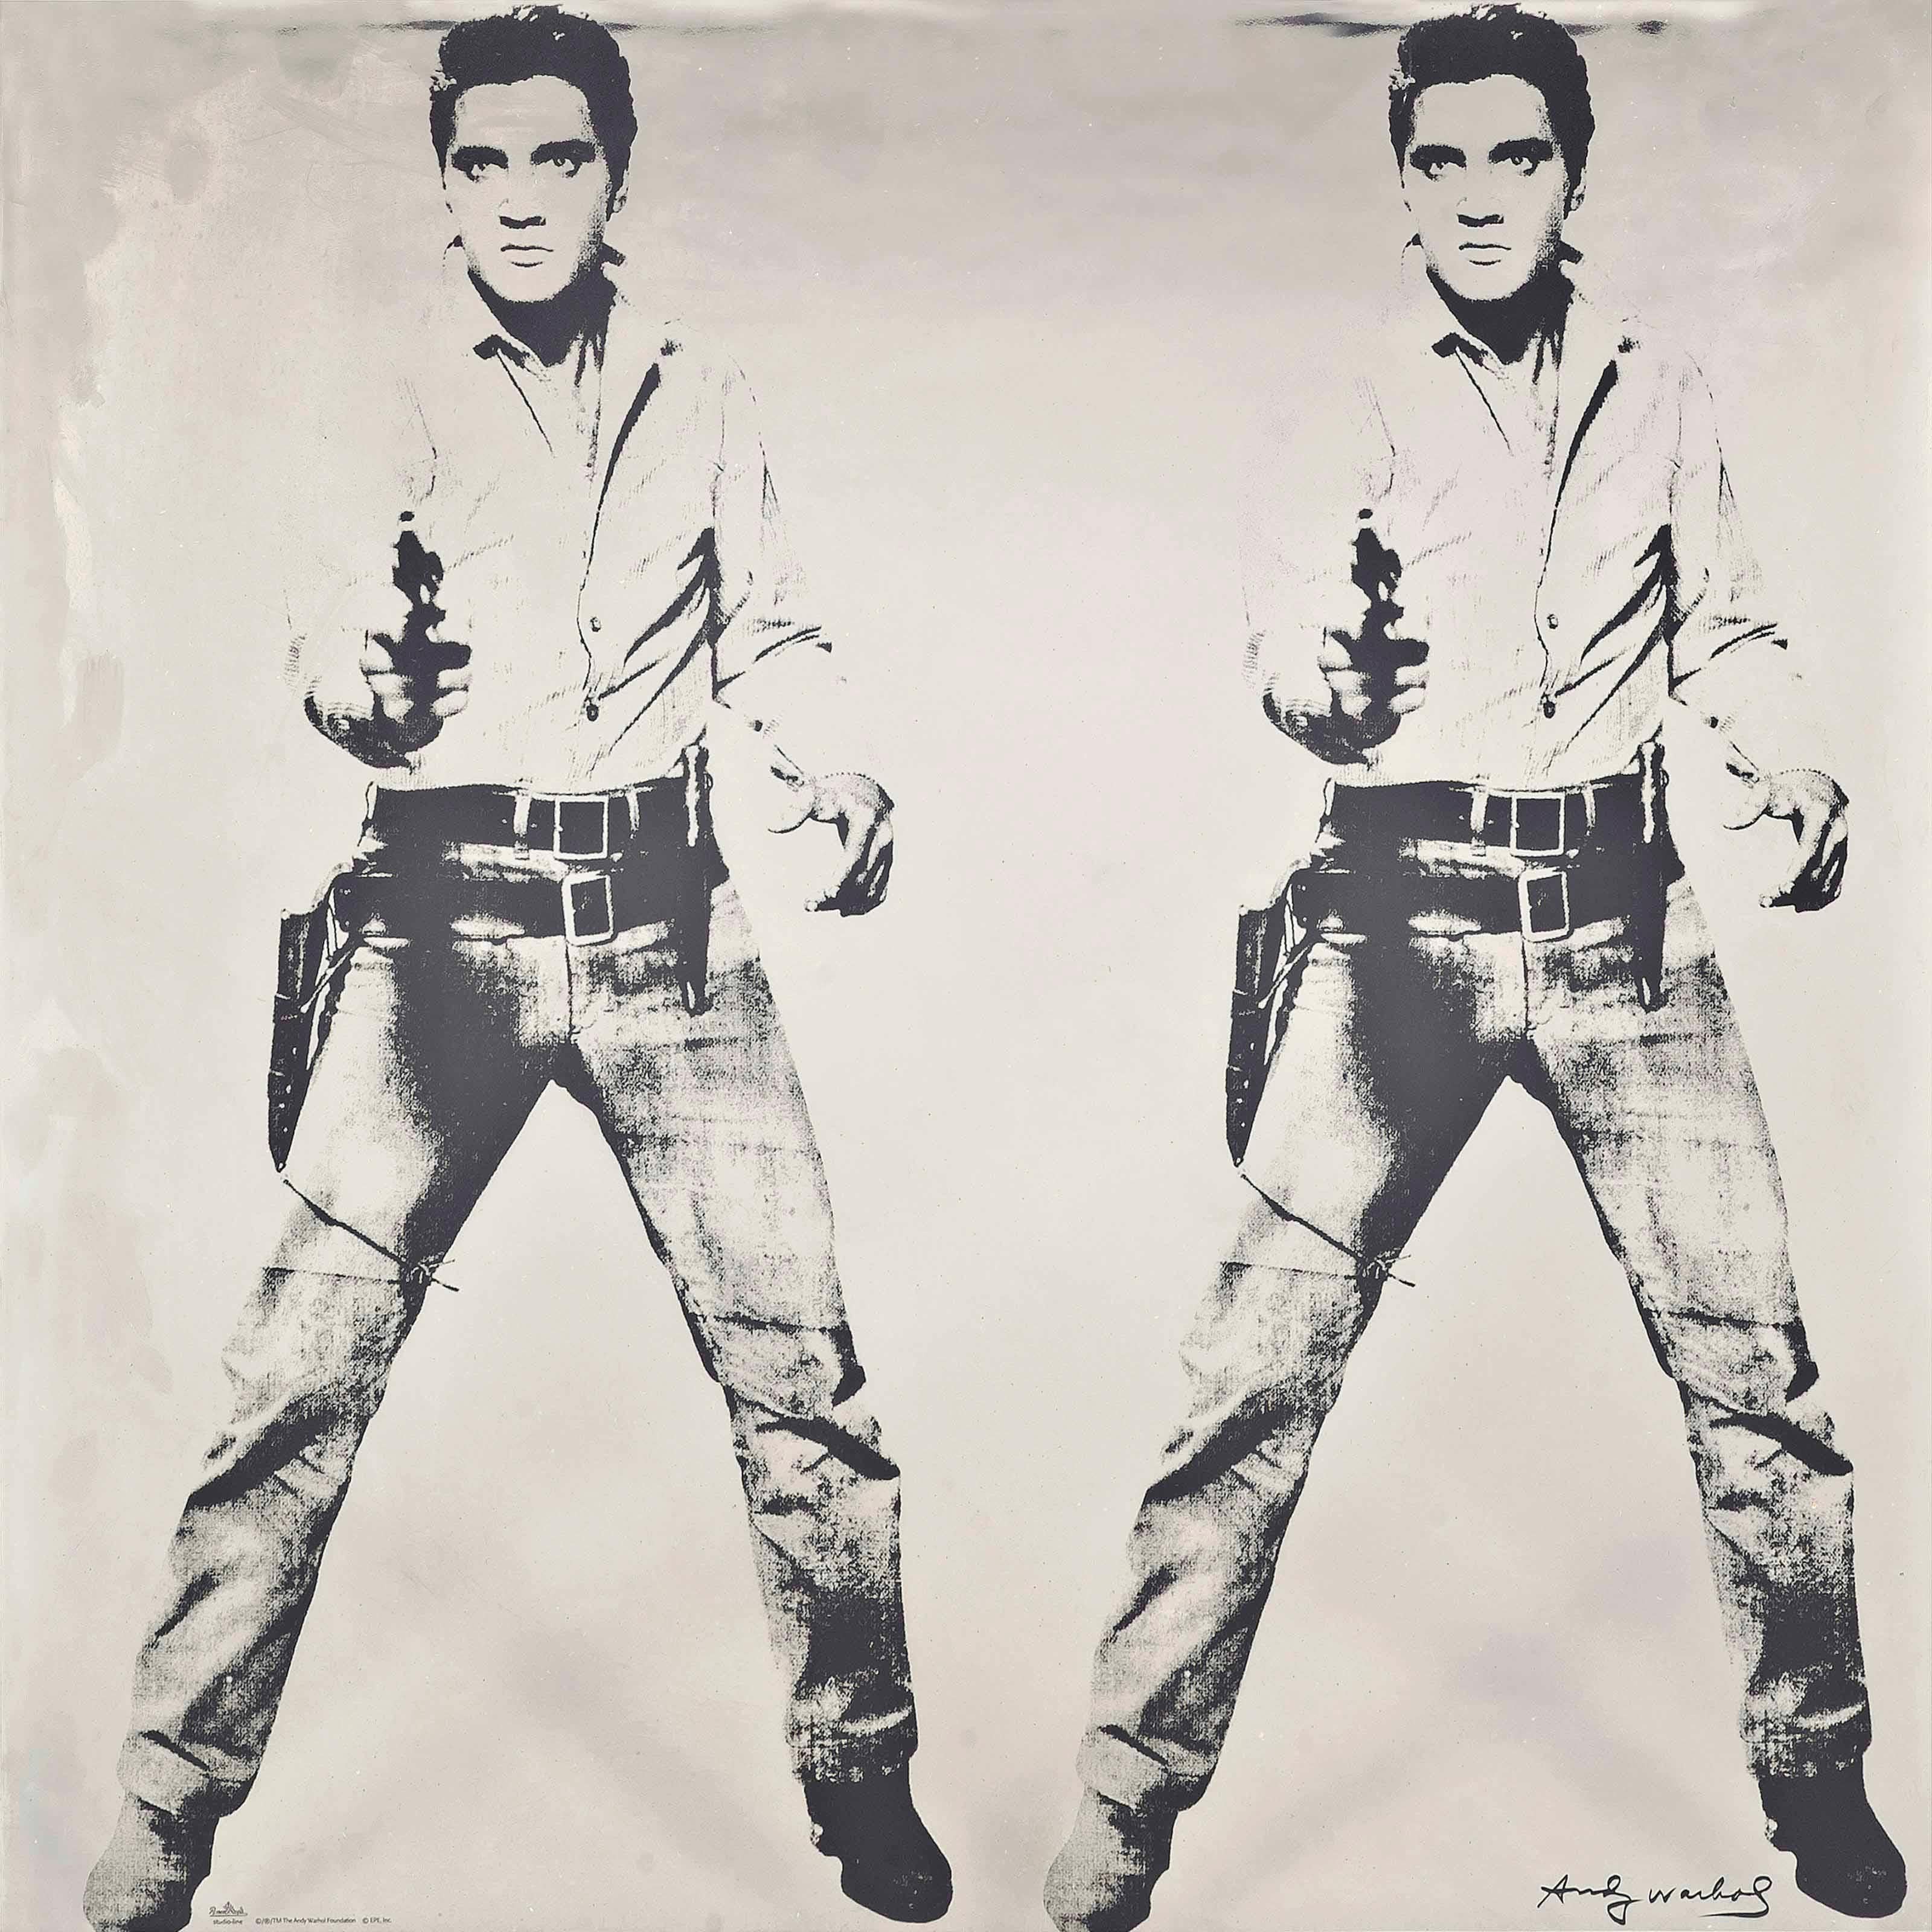 Andy Warhol, Platinum Elvis -Contemporary Art, Edition, Gift, Pop Art, Design - Print by (after) Andy Warhol